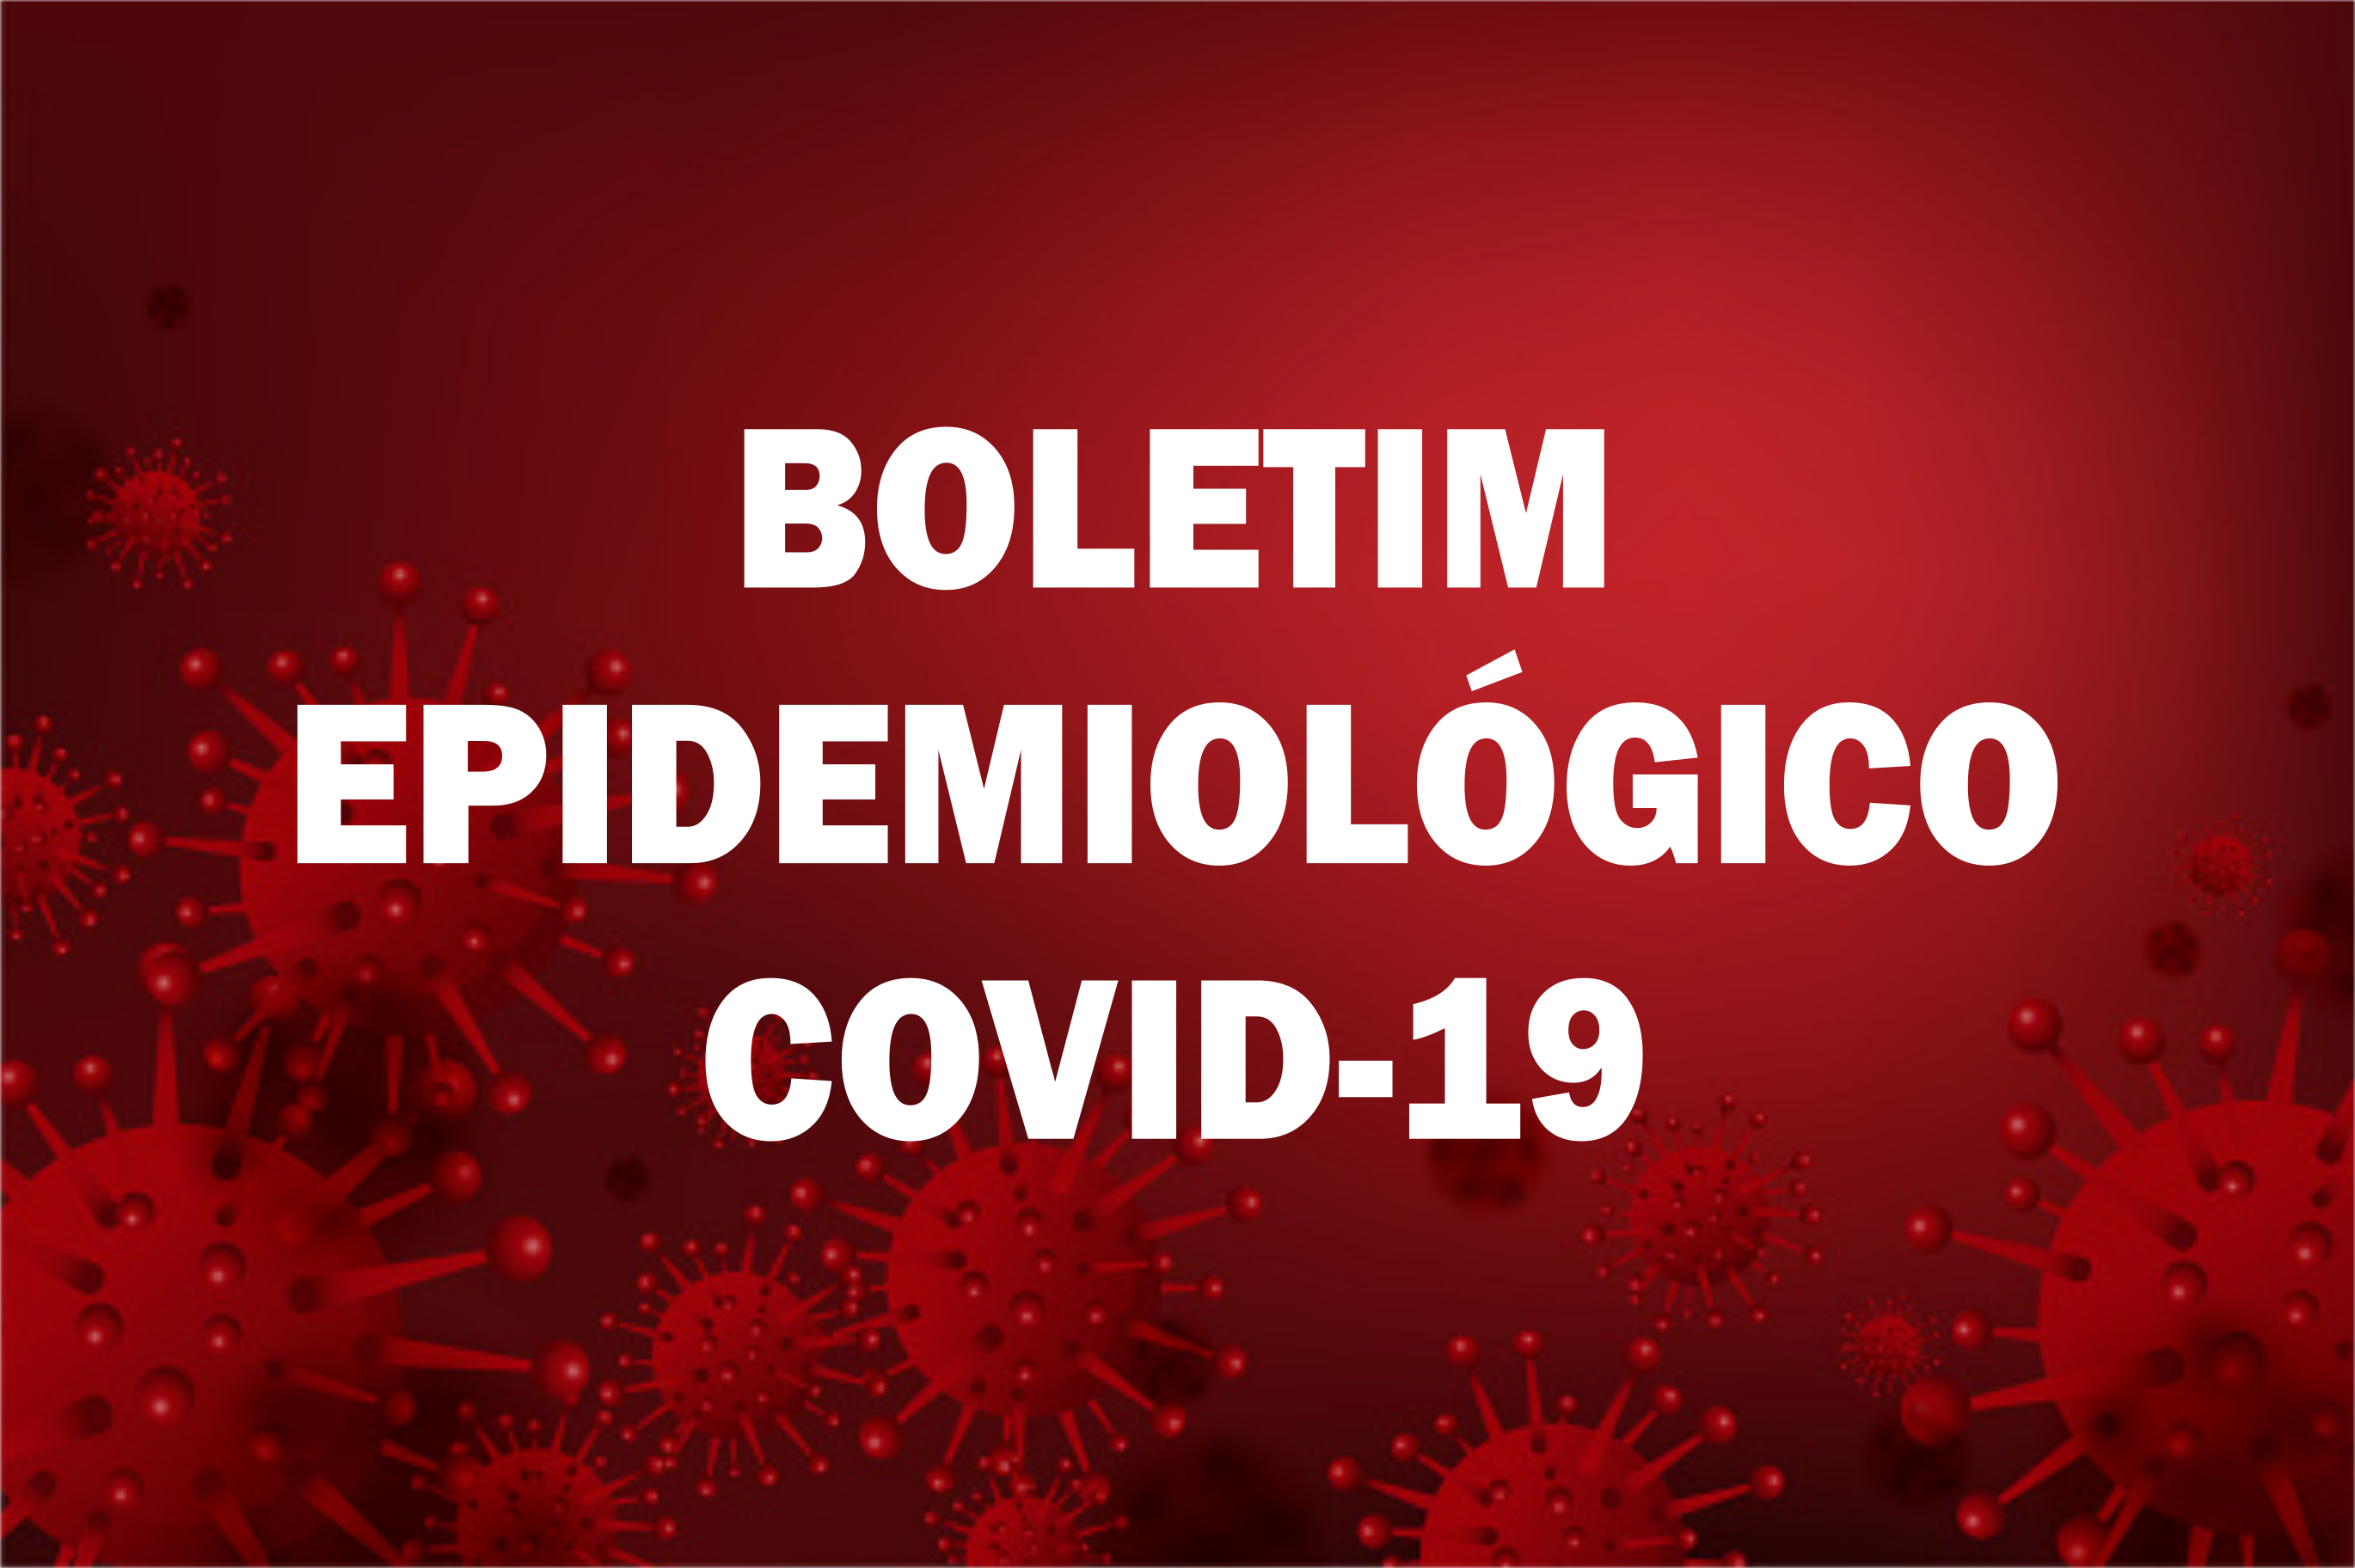 You are currently viewing BOLETIM EPIDEMIOLÓGICO Nº 139 (COVID-19)